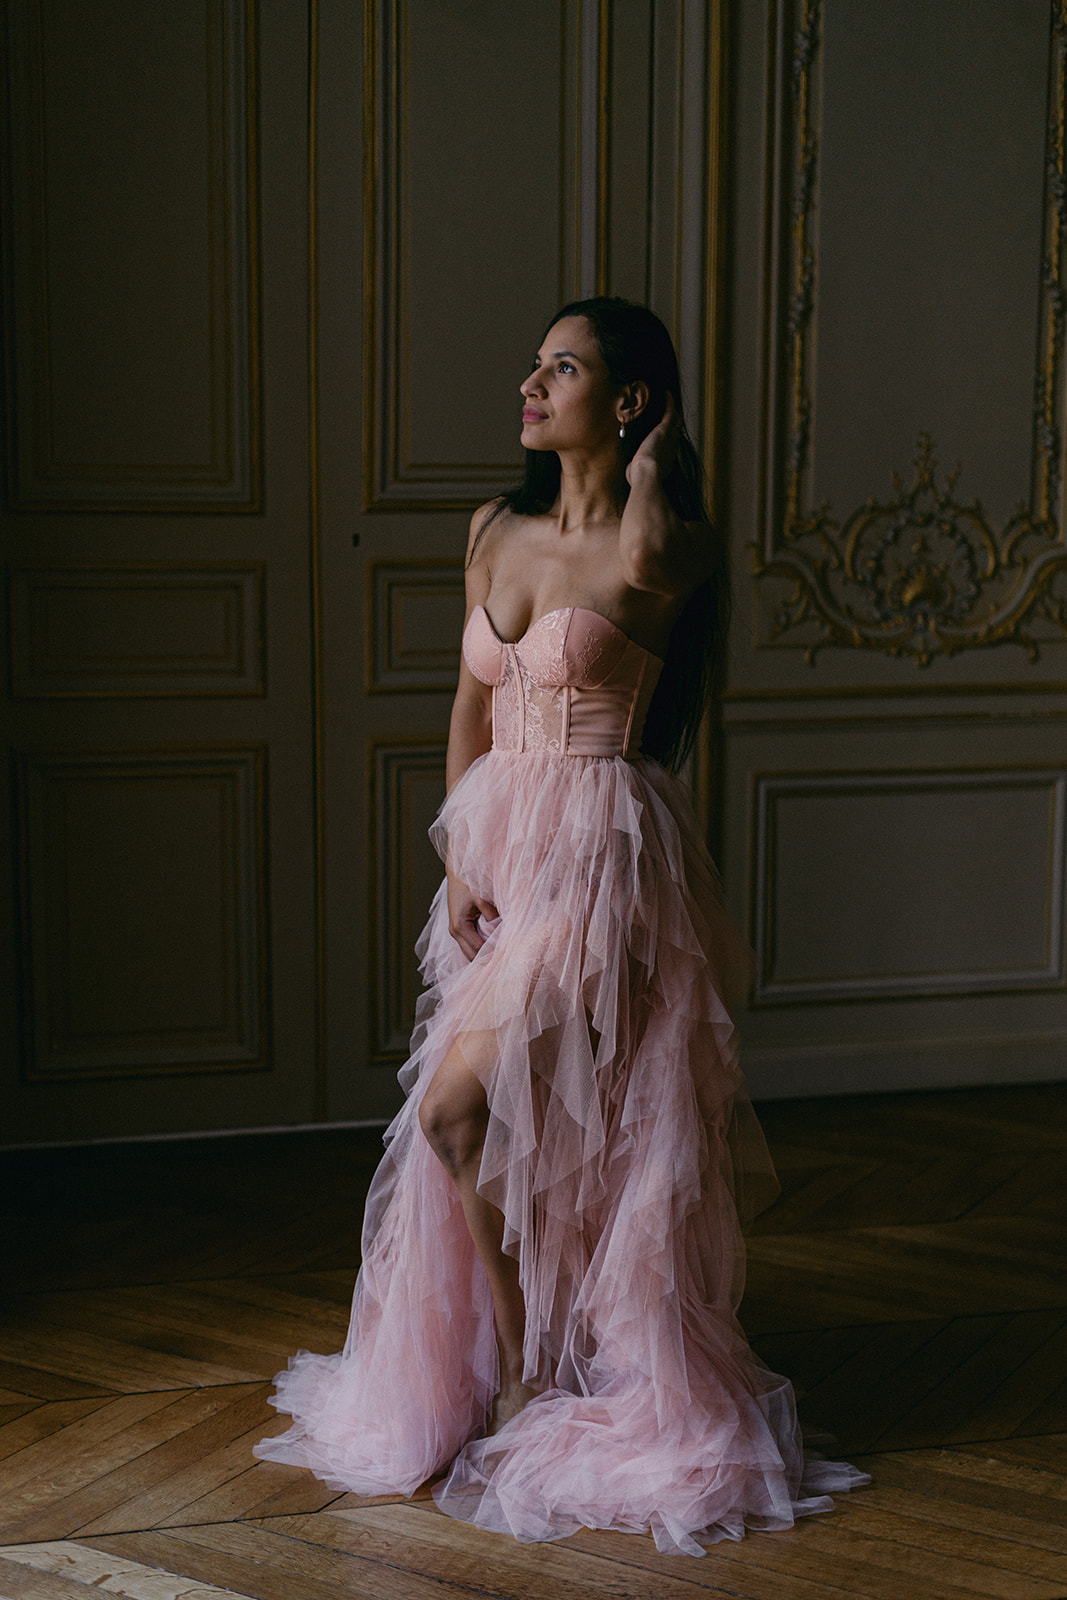 Woman in pink tulle dress illuminated by the window light in Paris hotel